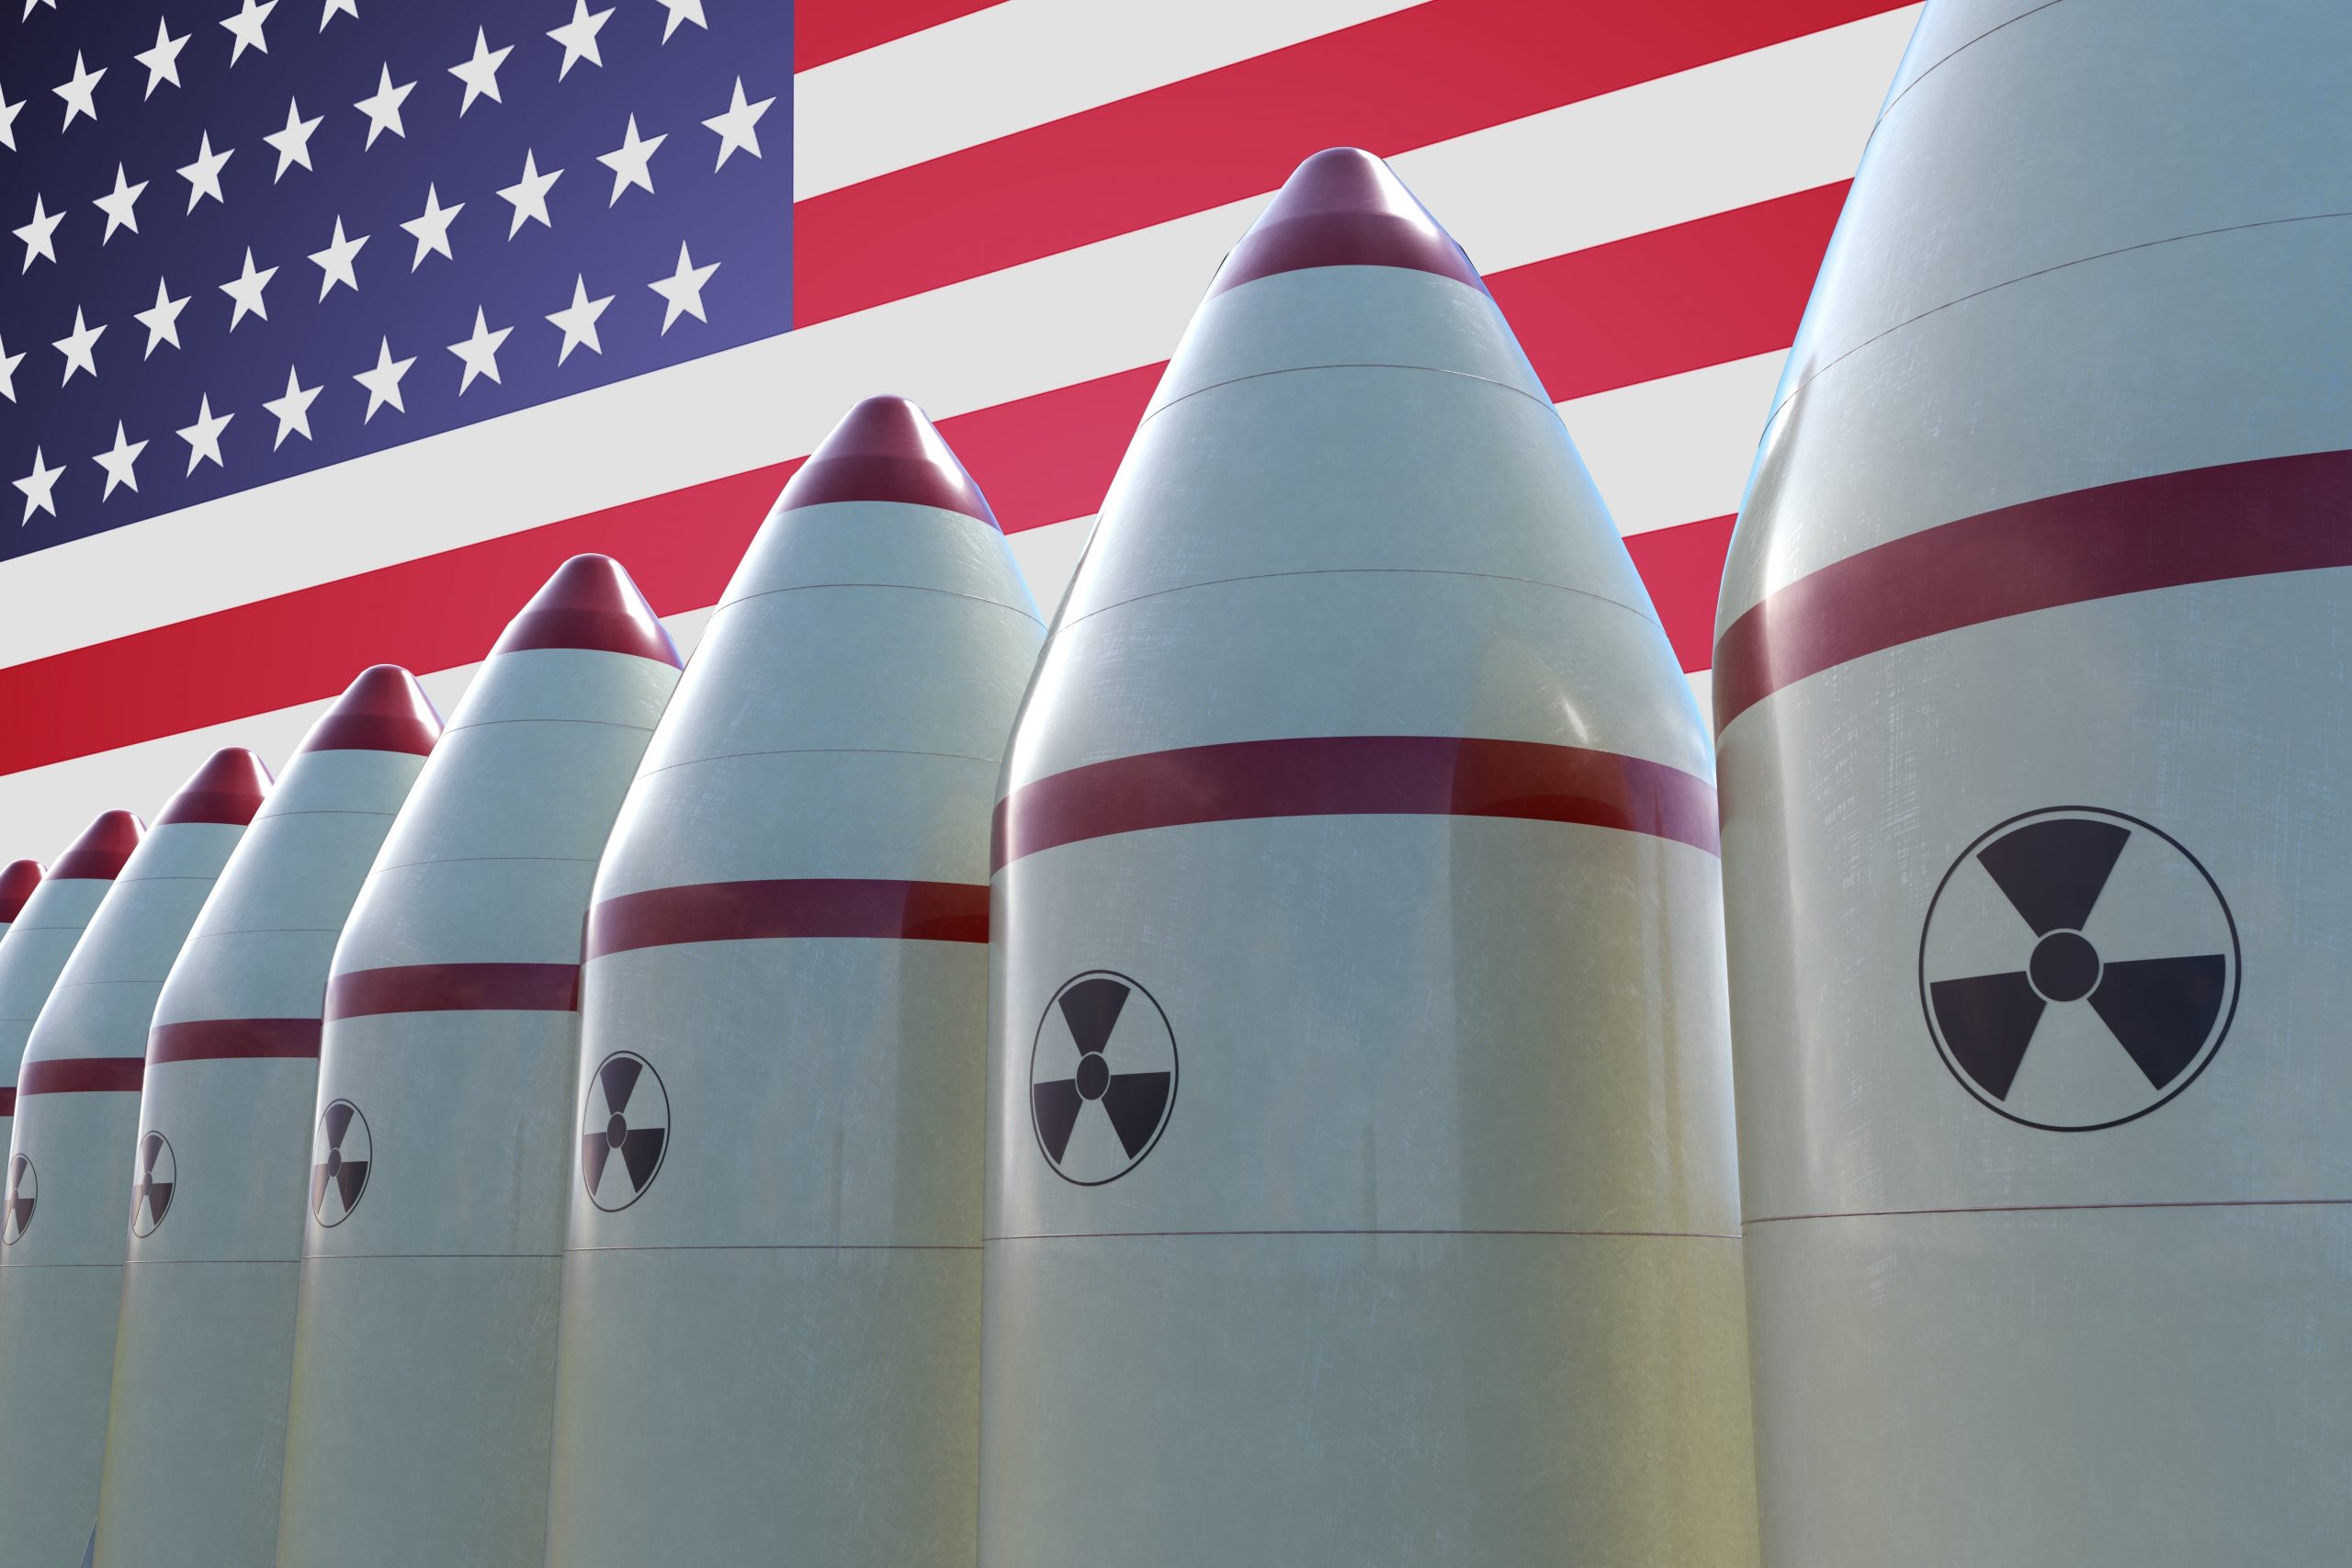 Nuclear,Missiles,And,Usa,Flag,In,Background.,3d,Rendered,Illustration.